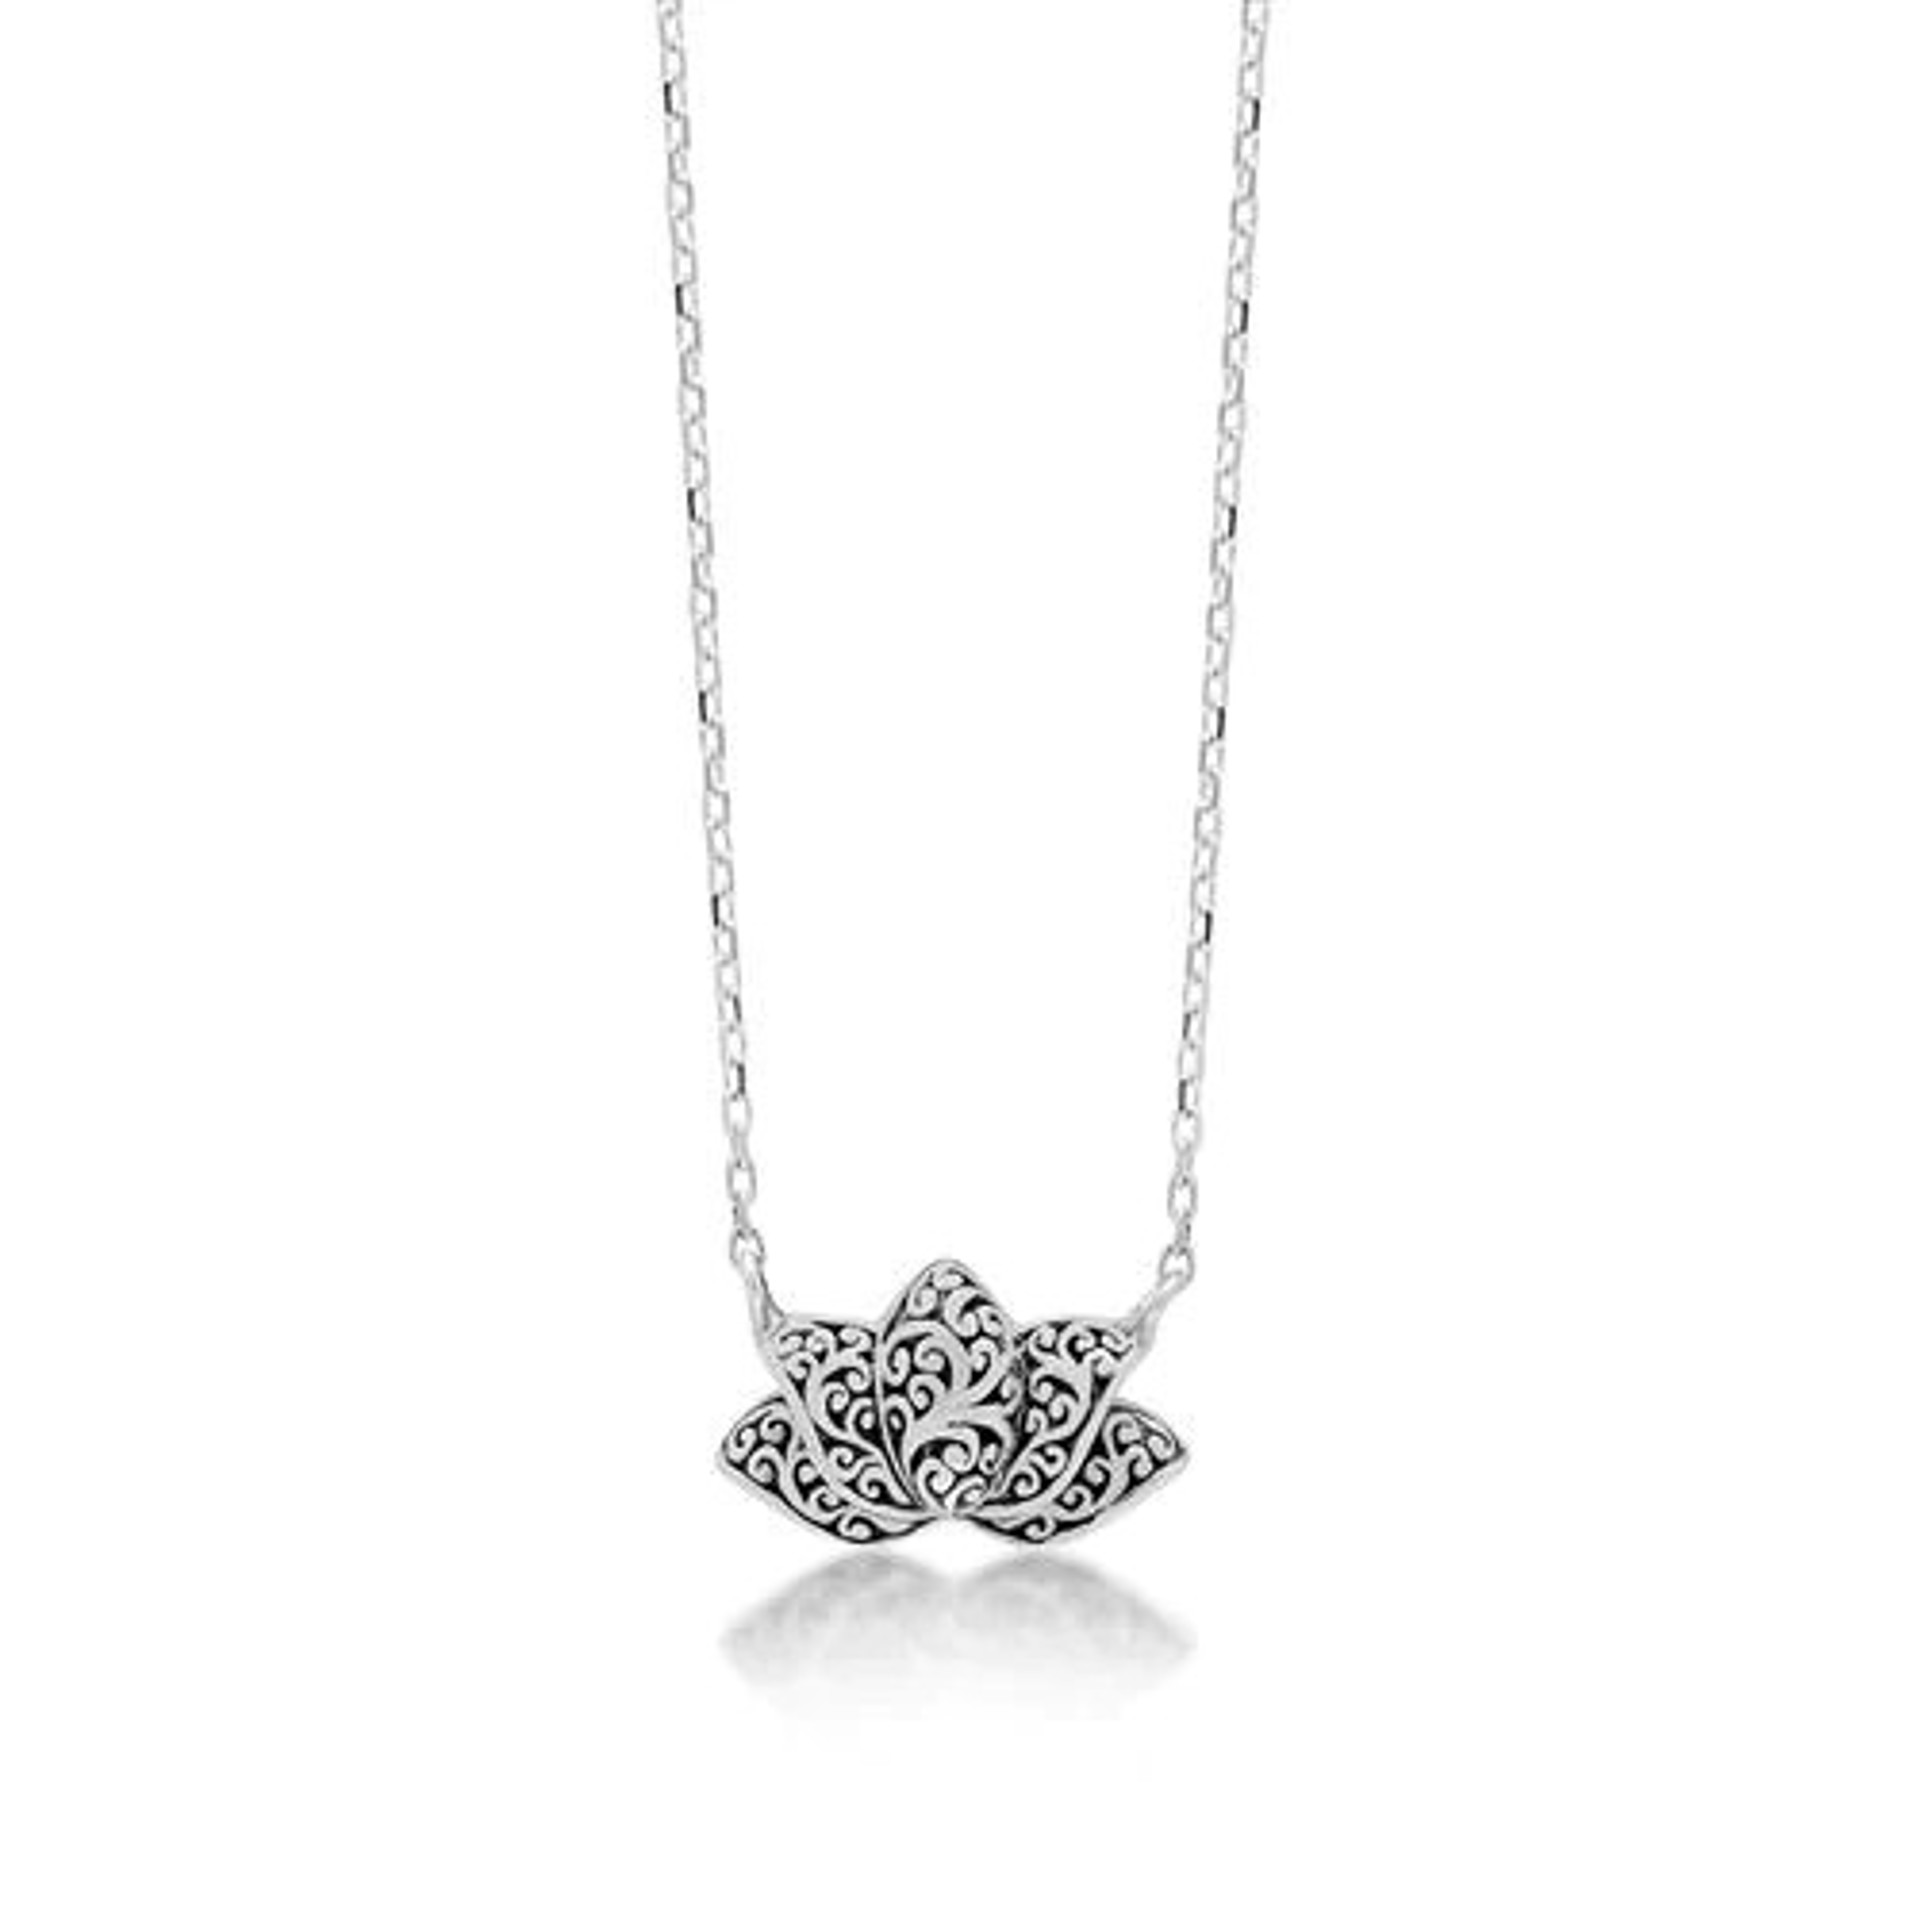 1098 Silver Delicate Lotus Pendant Necklace (SO) by Lois Hill